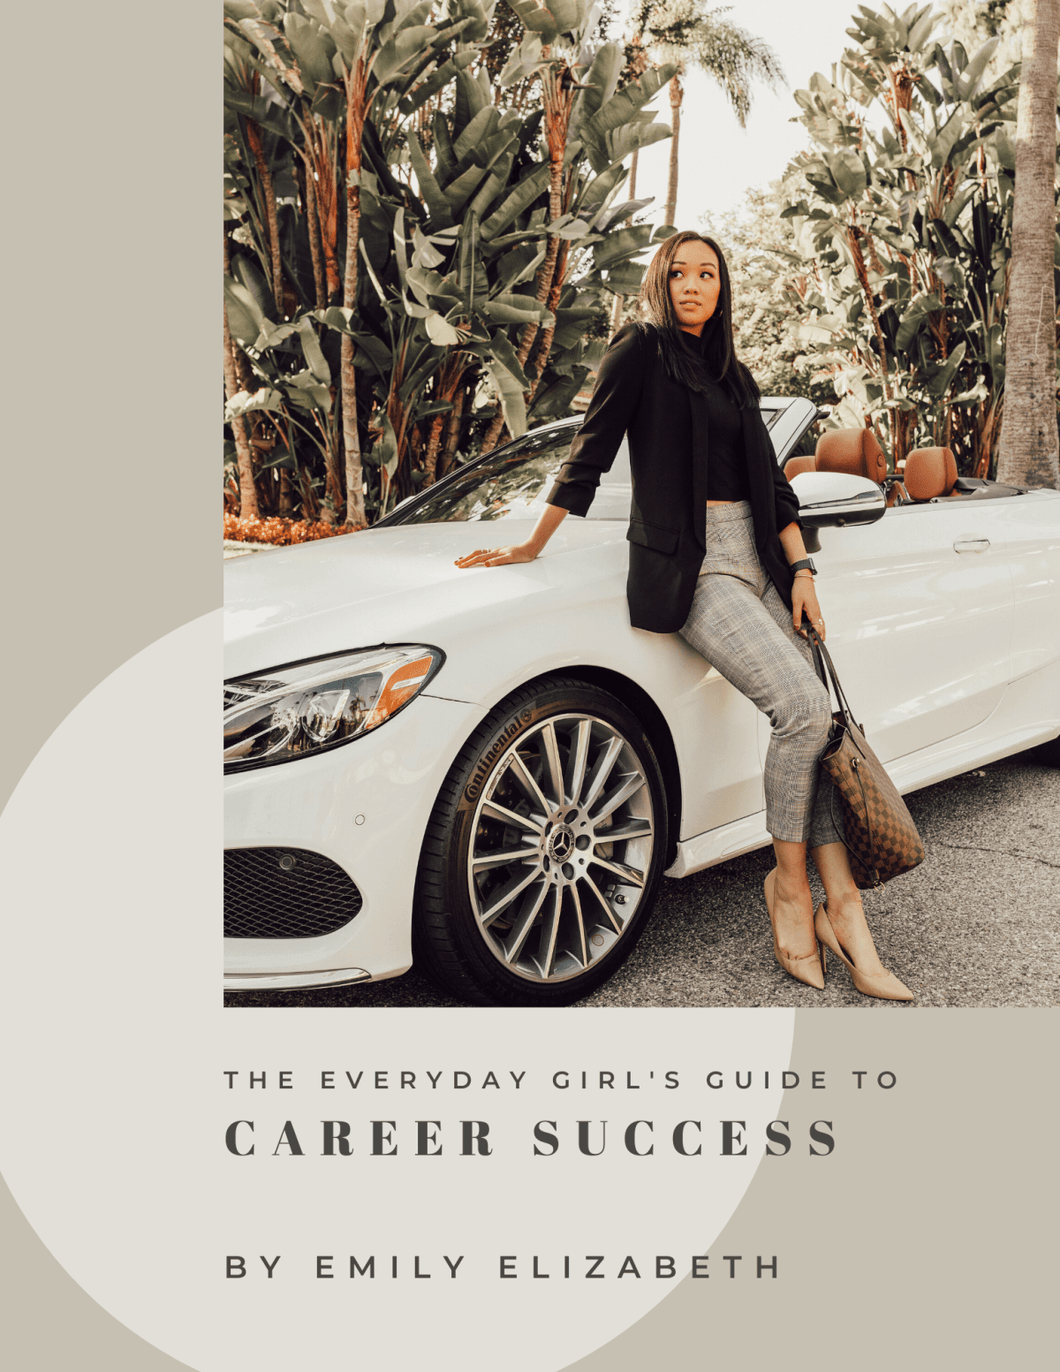 The Everyday Girl's Guide to Career Success